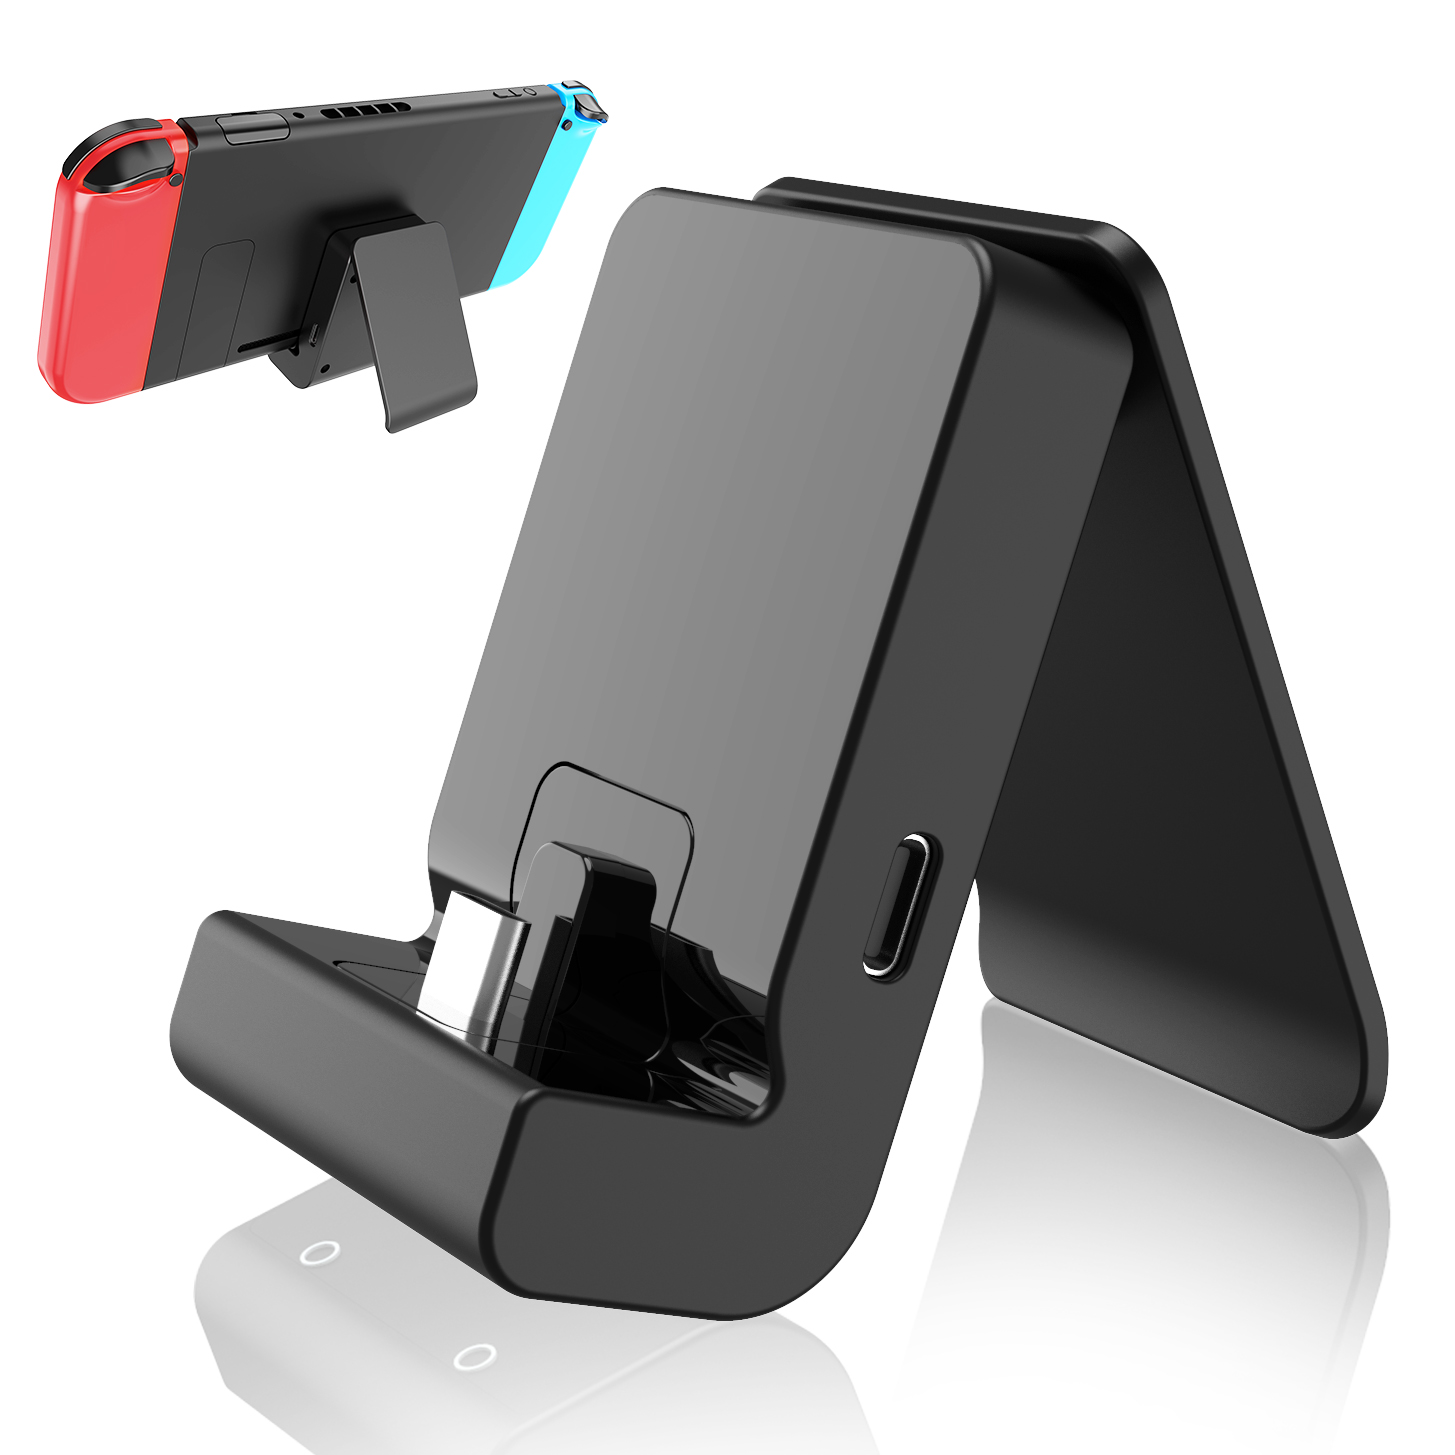 Nintendo Switch charger dock 